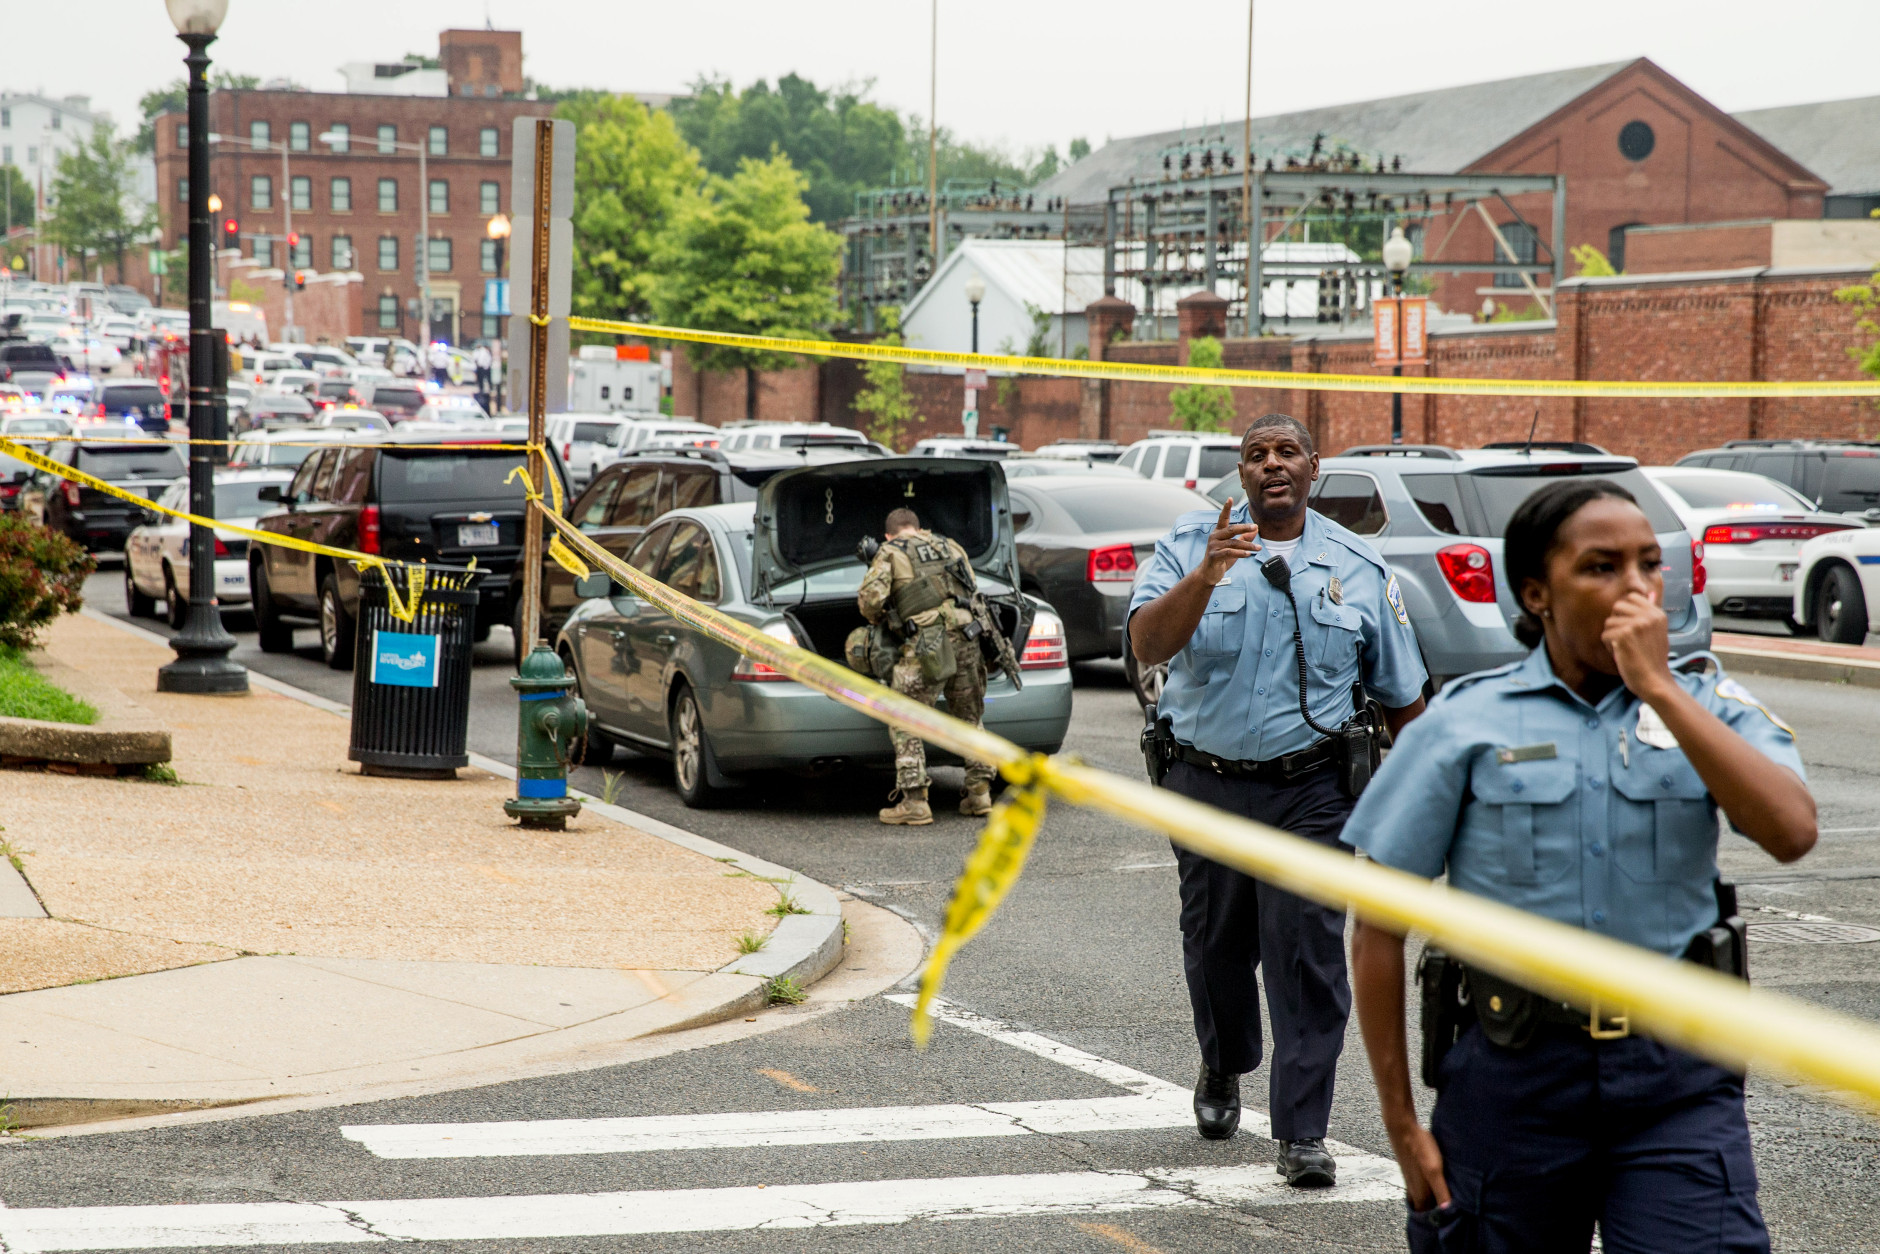 A large police presence gathers along M St. in Southeast Washington, Thursday, July 2, 2015. The Washington Navy Yard was on lockdown Thursday morning after reports of gunshots, but a senior federal law enforcement official says there has been no confirmed report of any shooting. (AP Photo/Andrew Harnik)